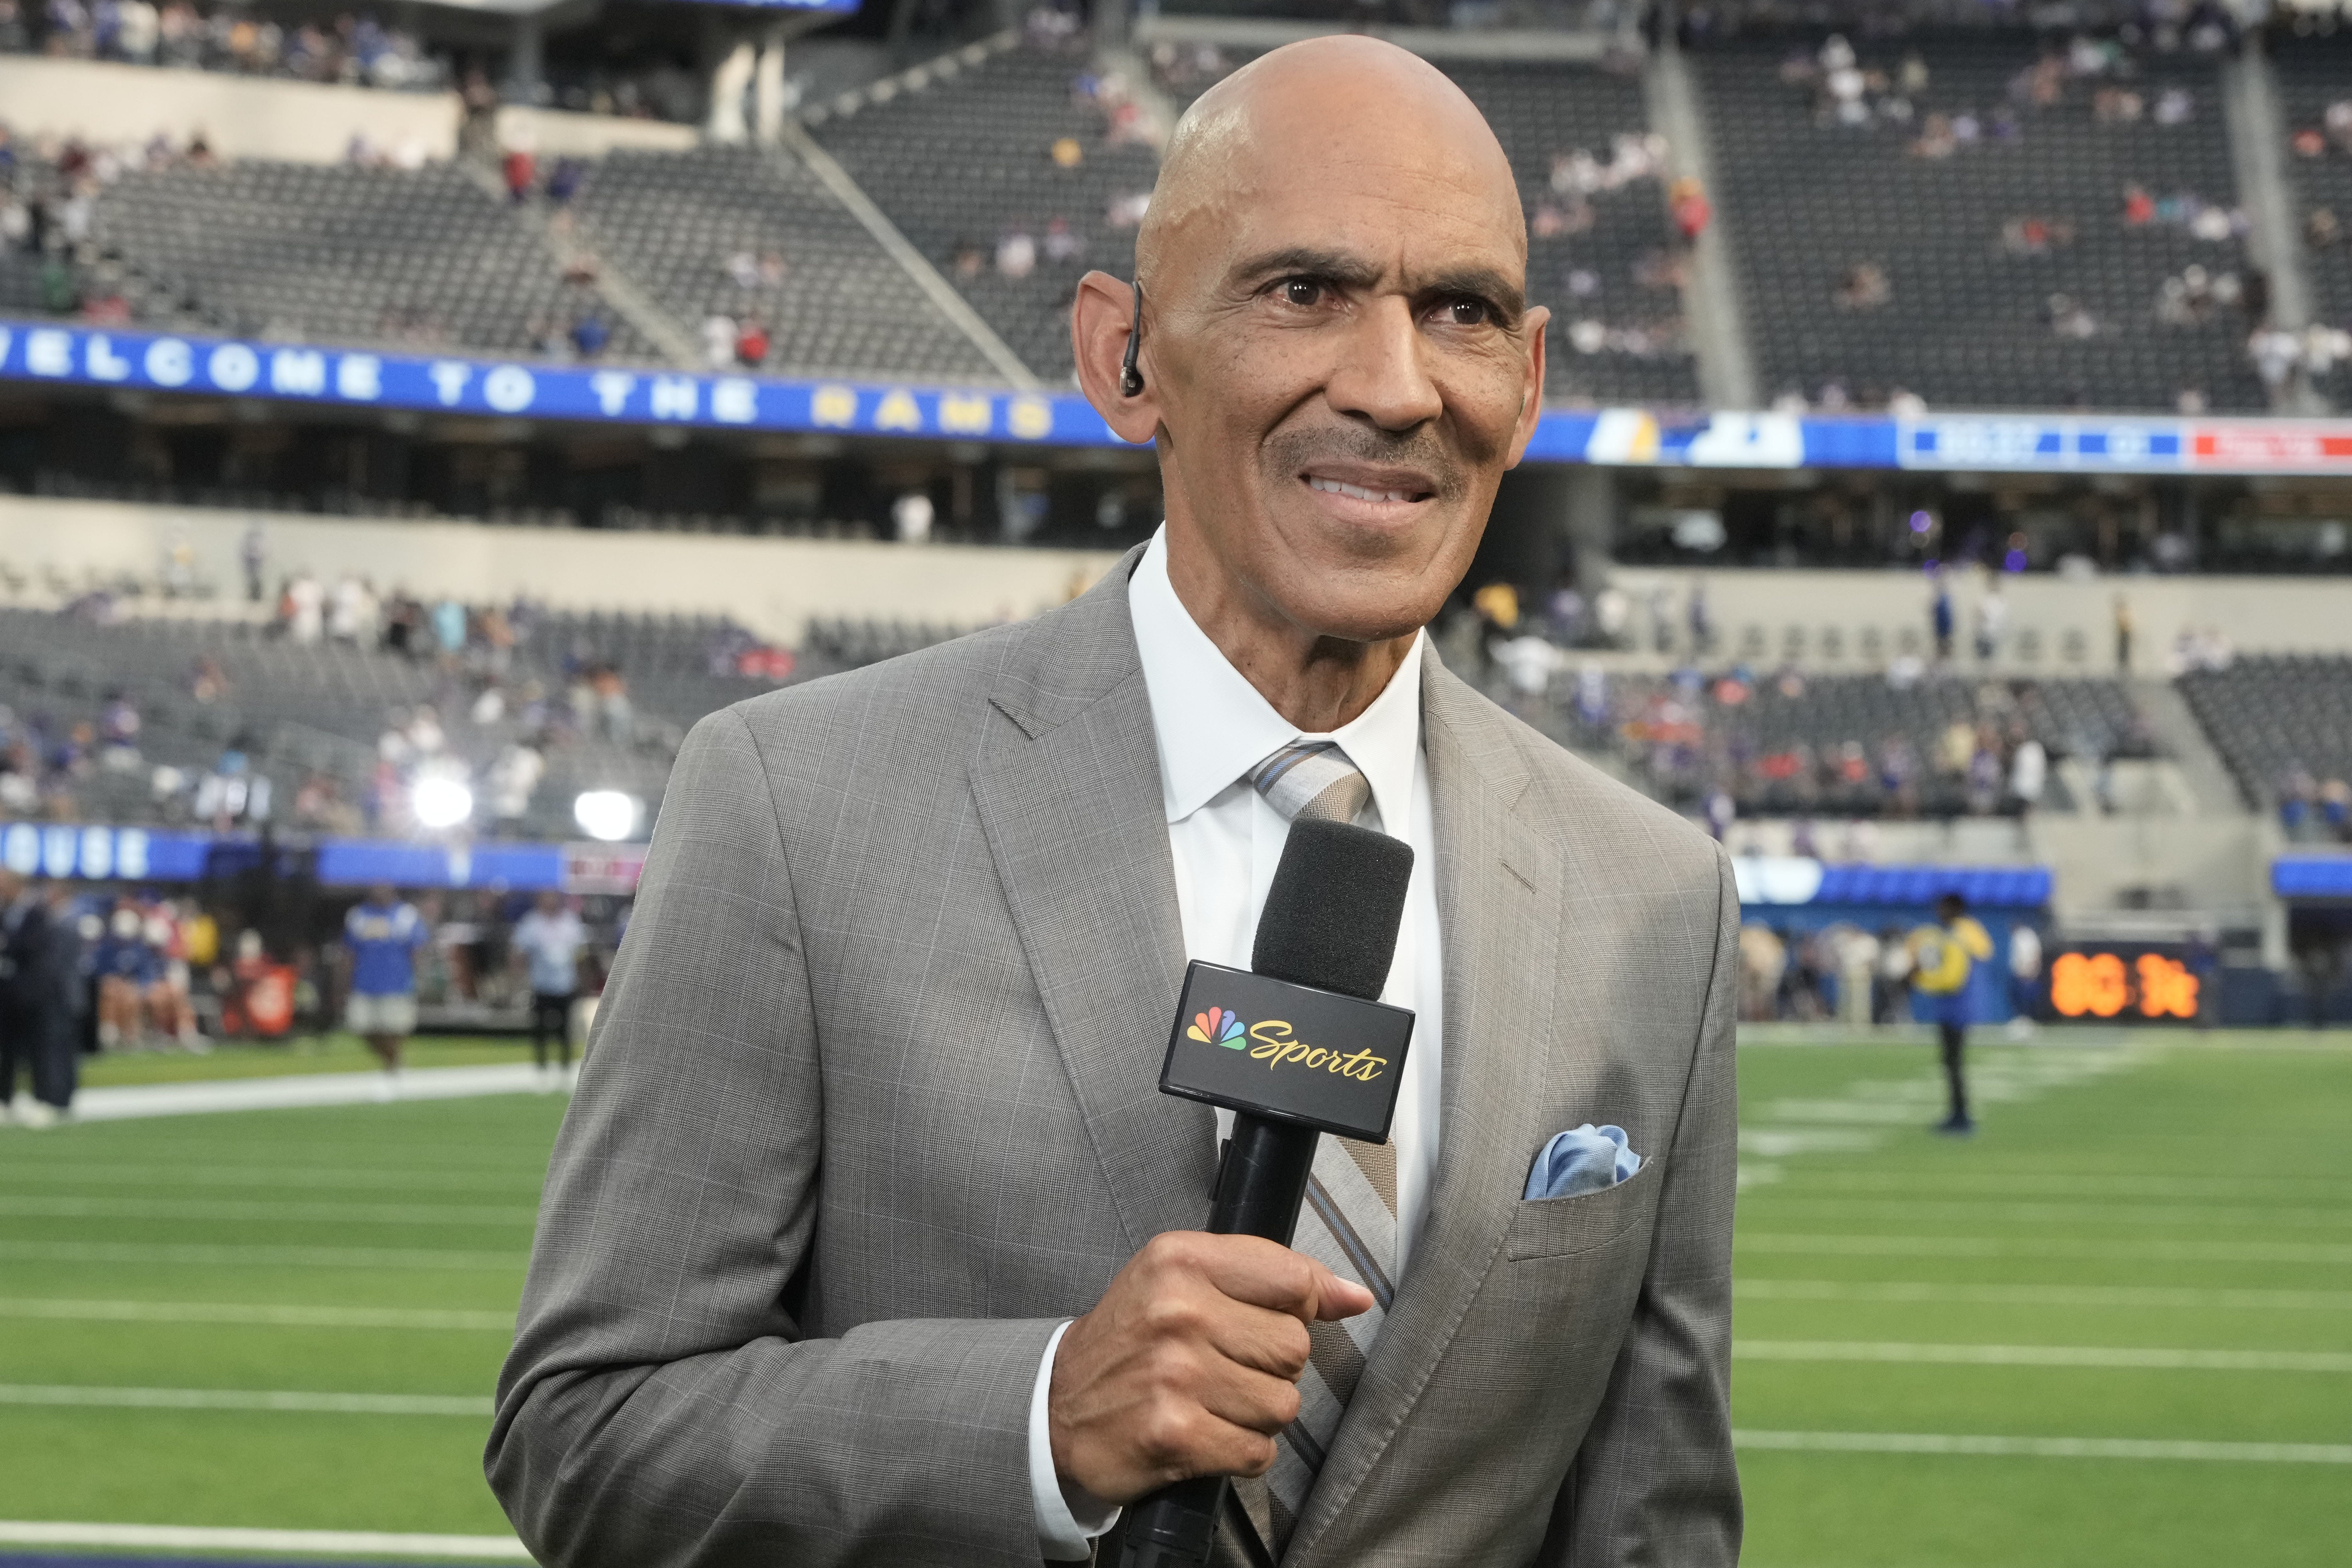 Tony Dungy shows his true values with hateful tweet that puts  transgender kids at risk | Opinion